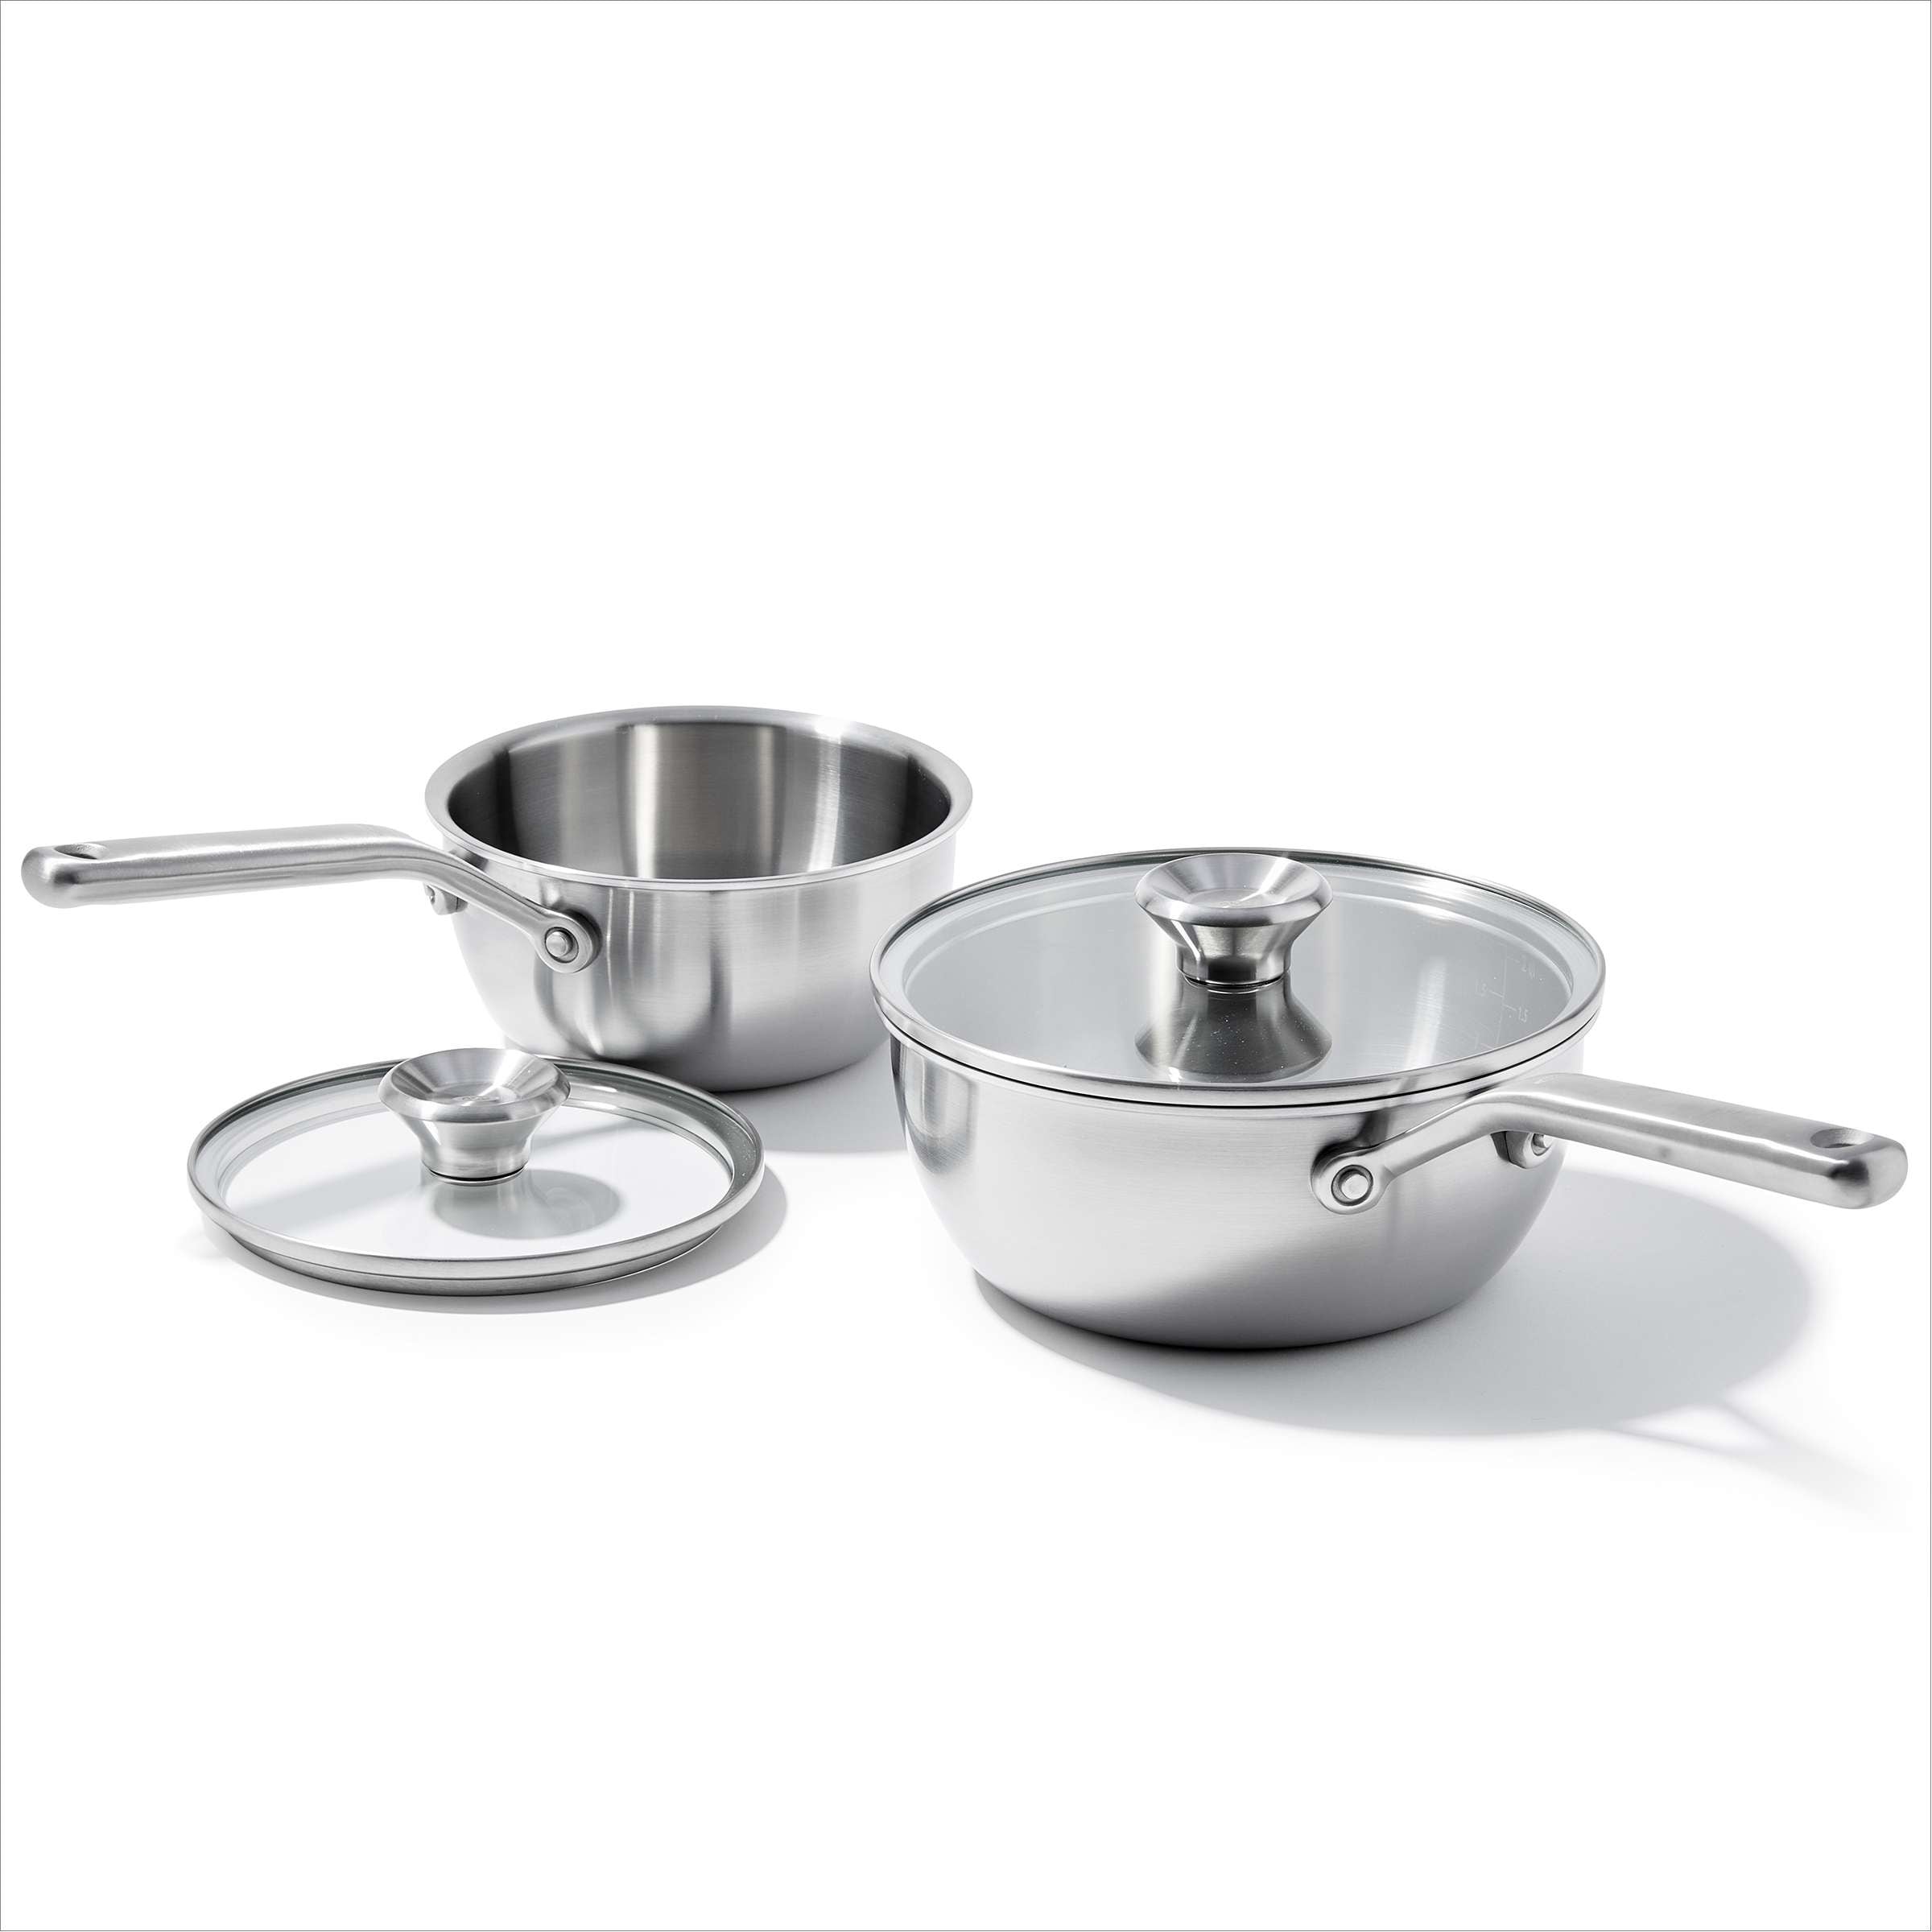 https://ak1.ostkcdn.com/images/products/is/images/direct/f5859c1102abdc93b414e135d784923af5492c9f/OXO-Mira-3-Ply-Stainless-Steel-2pc-Chef%27s-Pan-Set-with-Lids.jpg